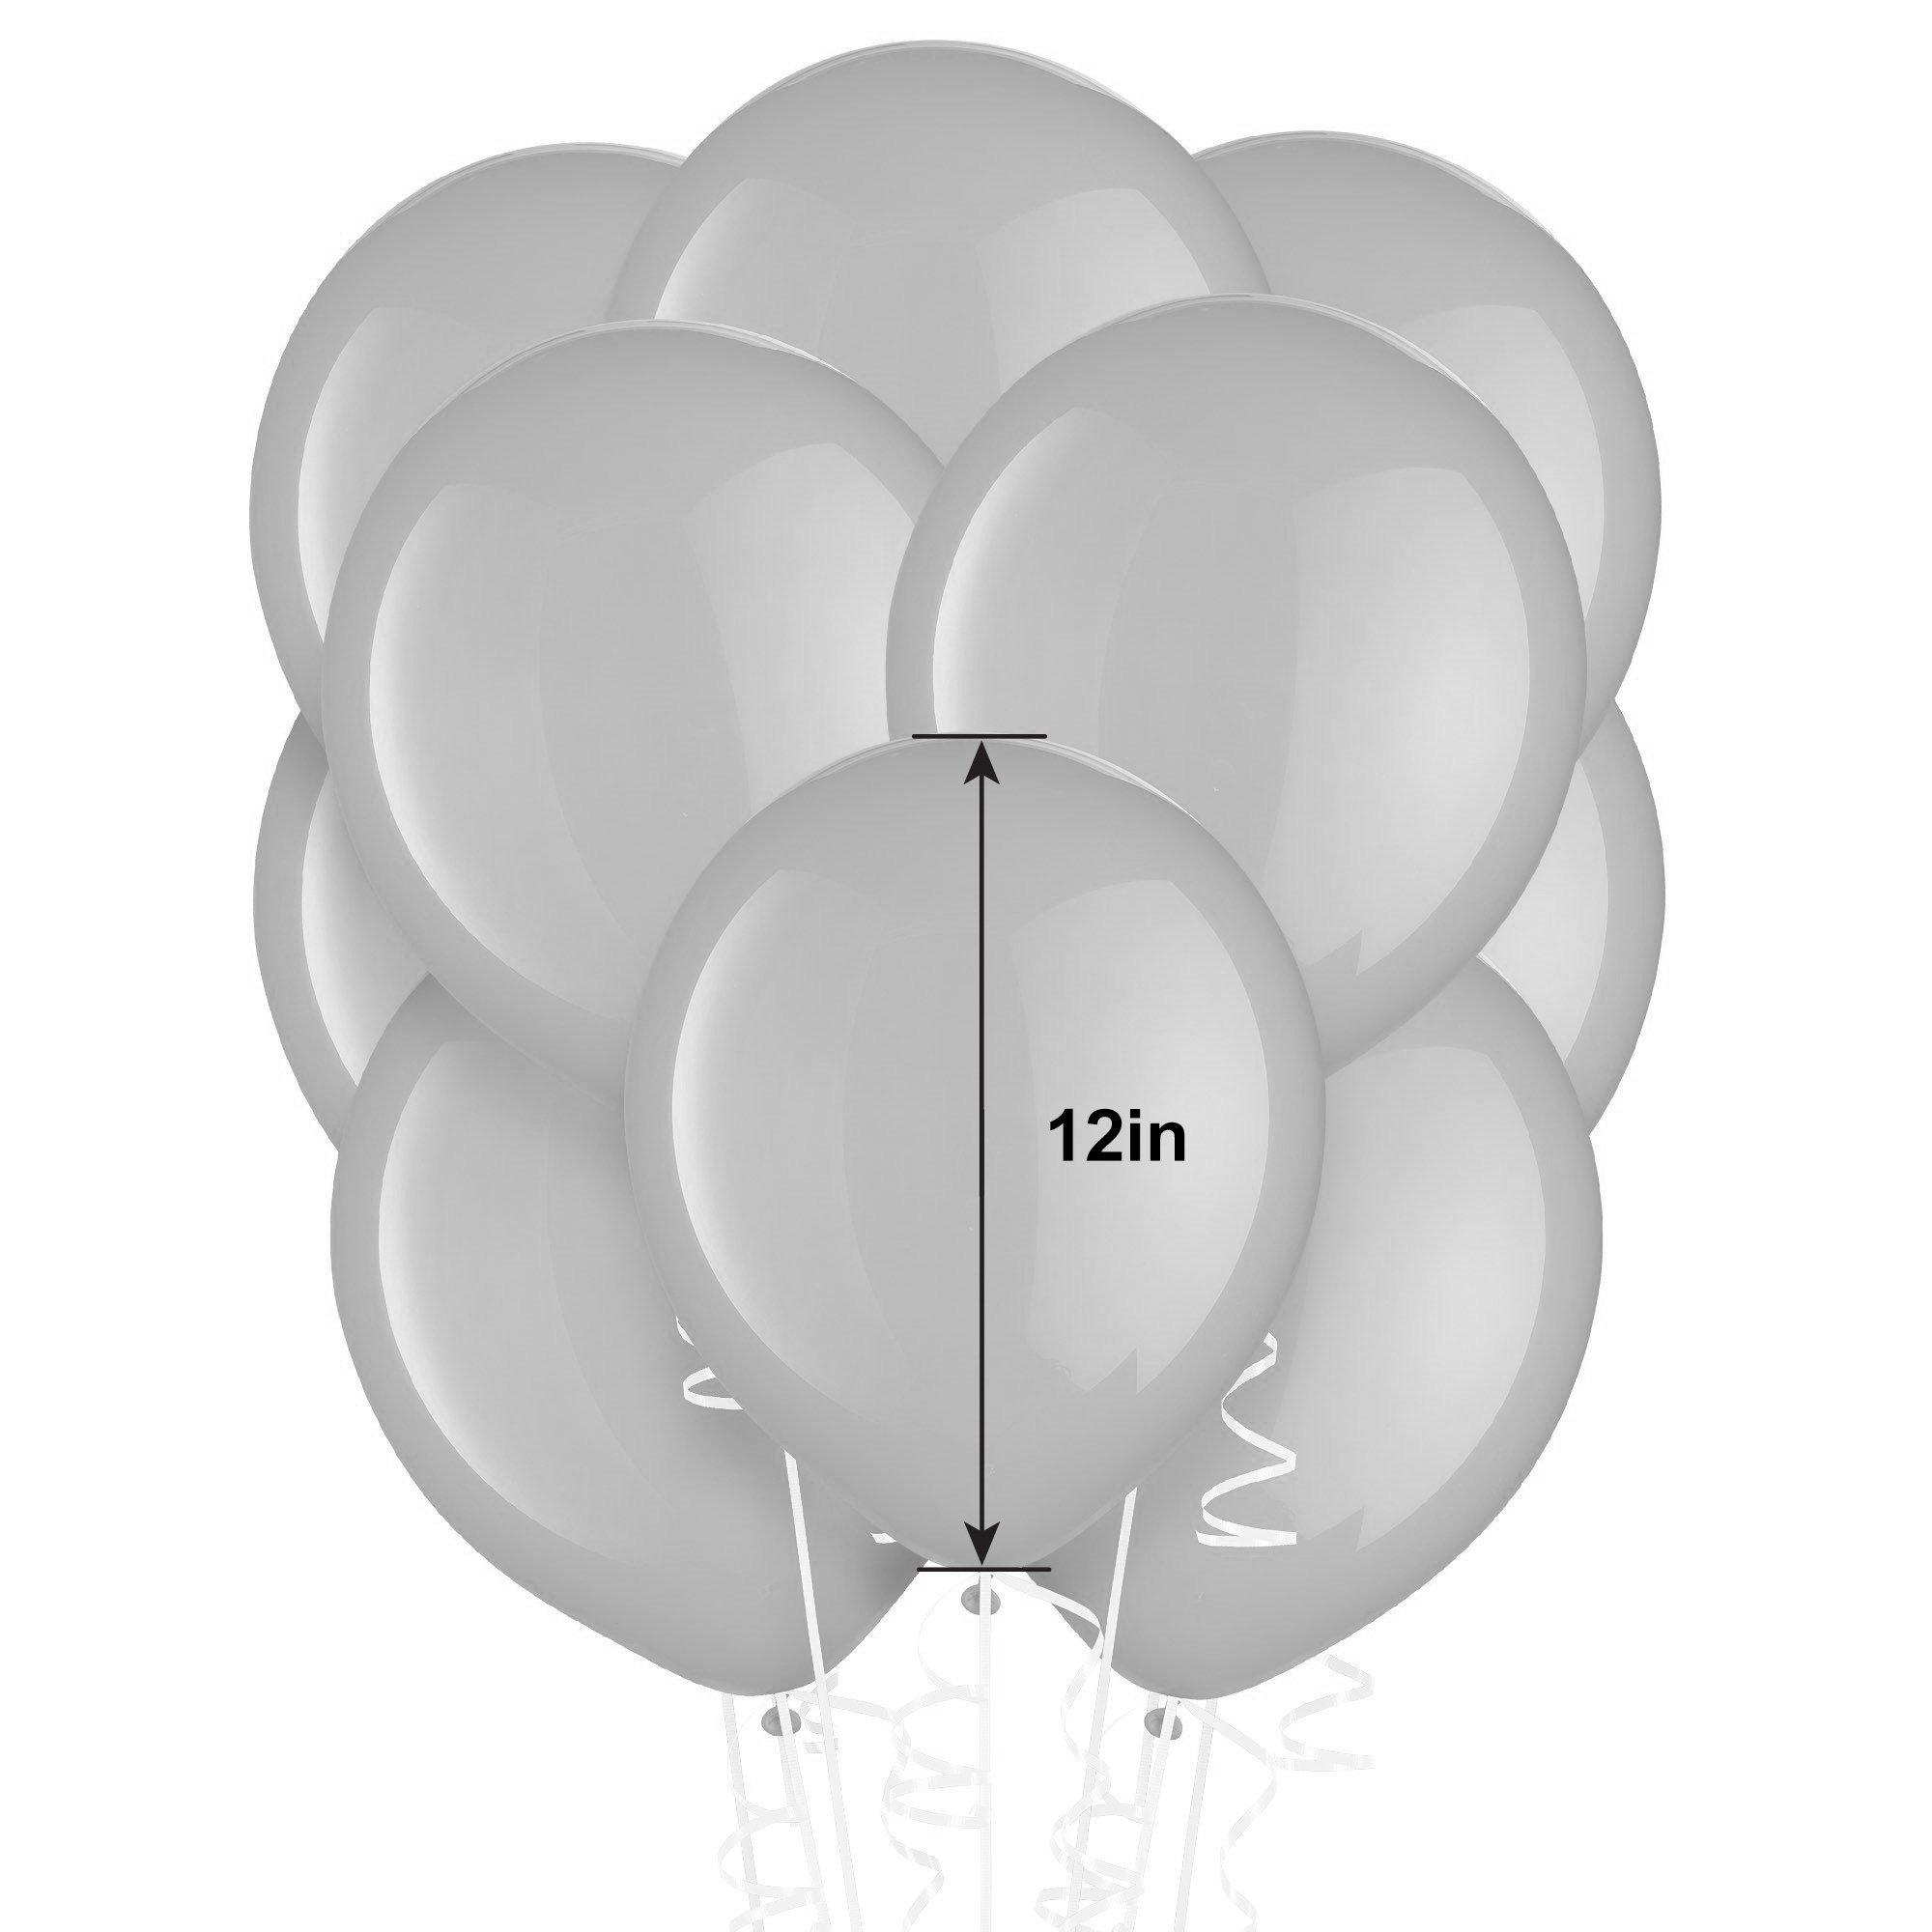 72ct, 12in, White Balloons